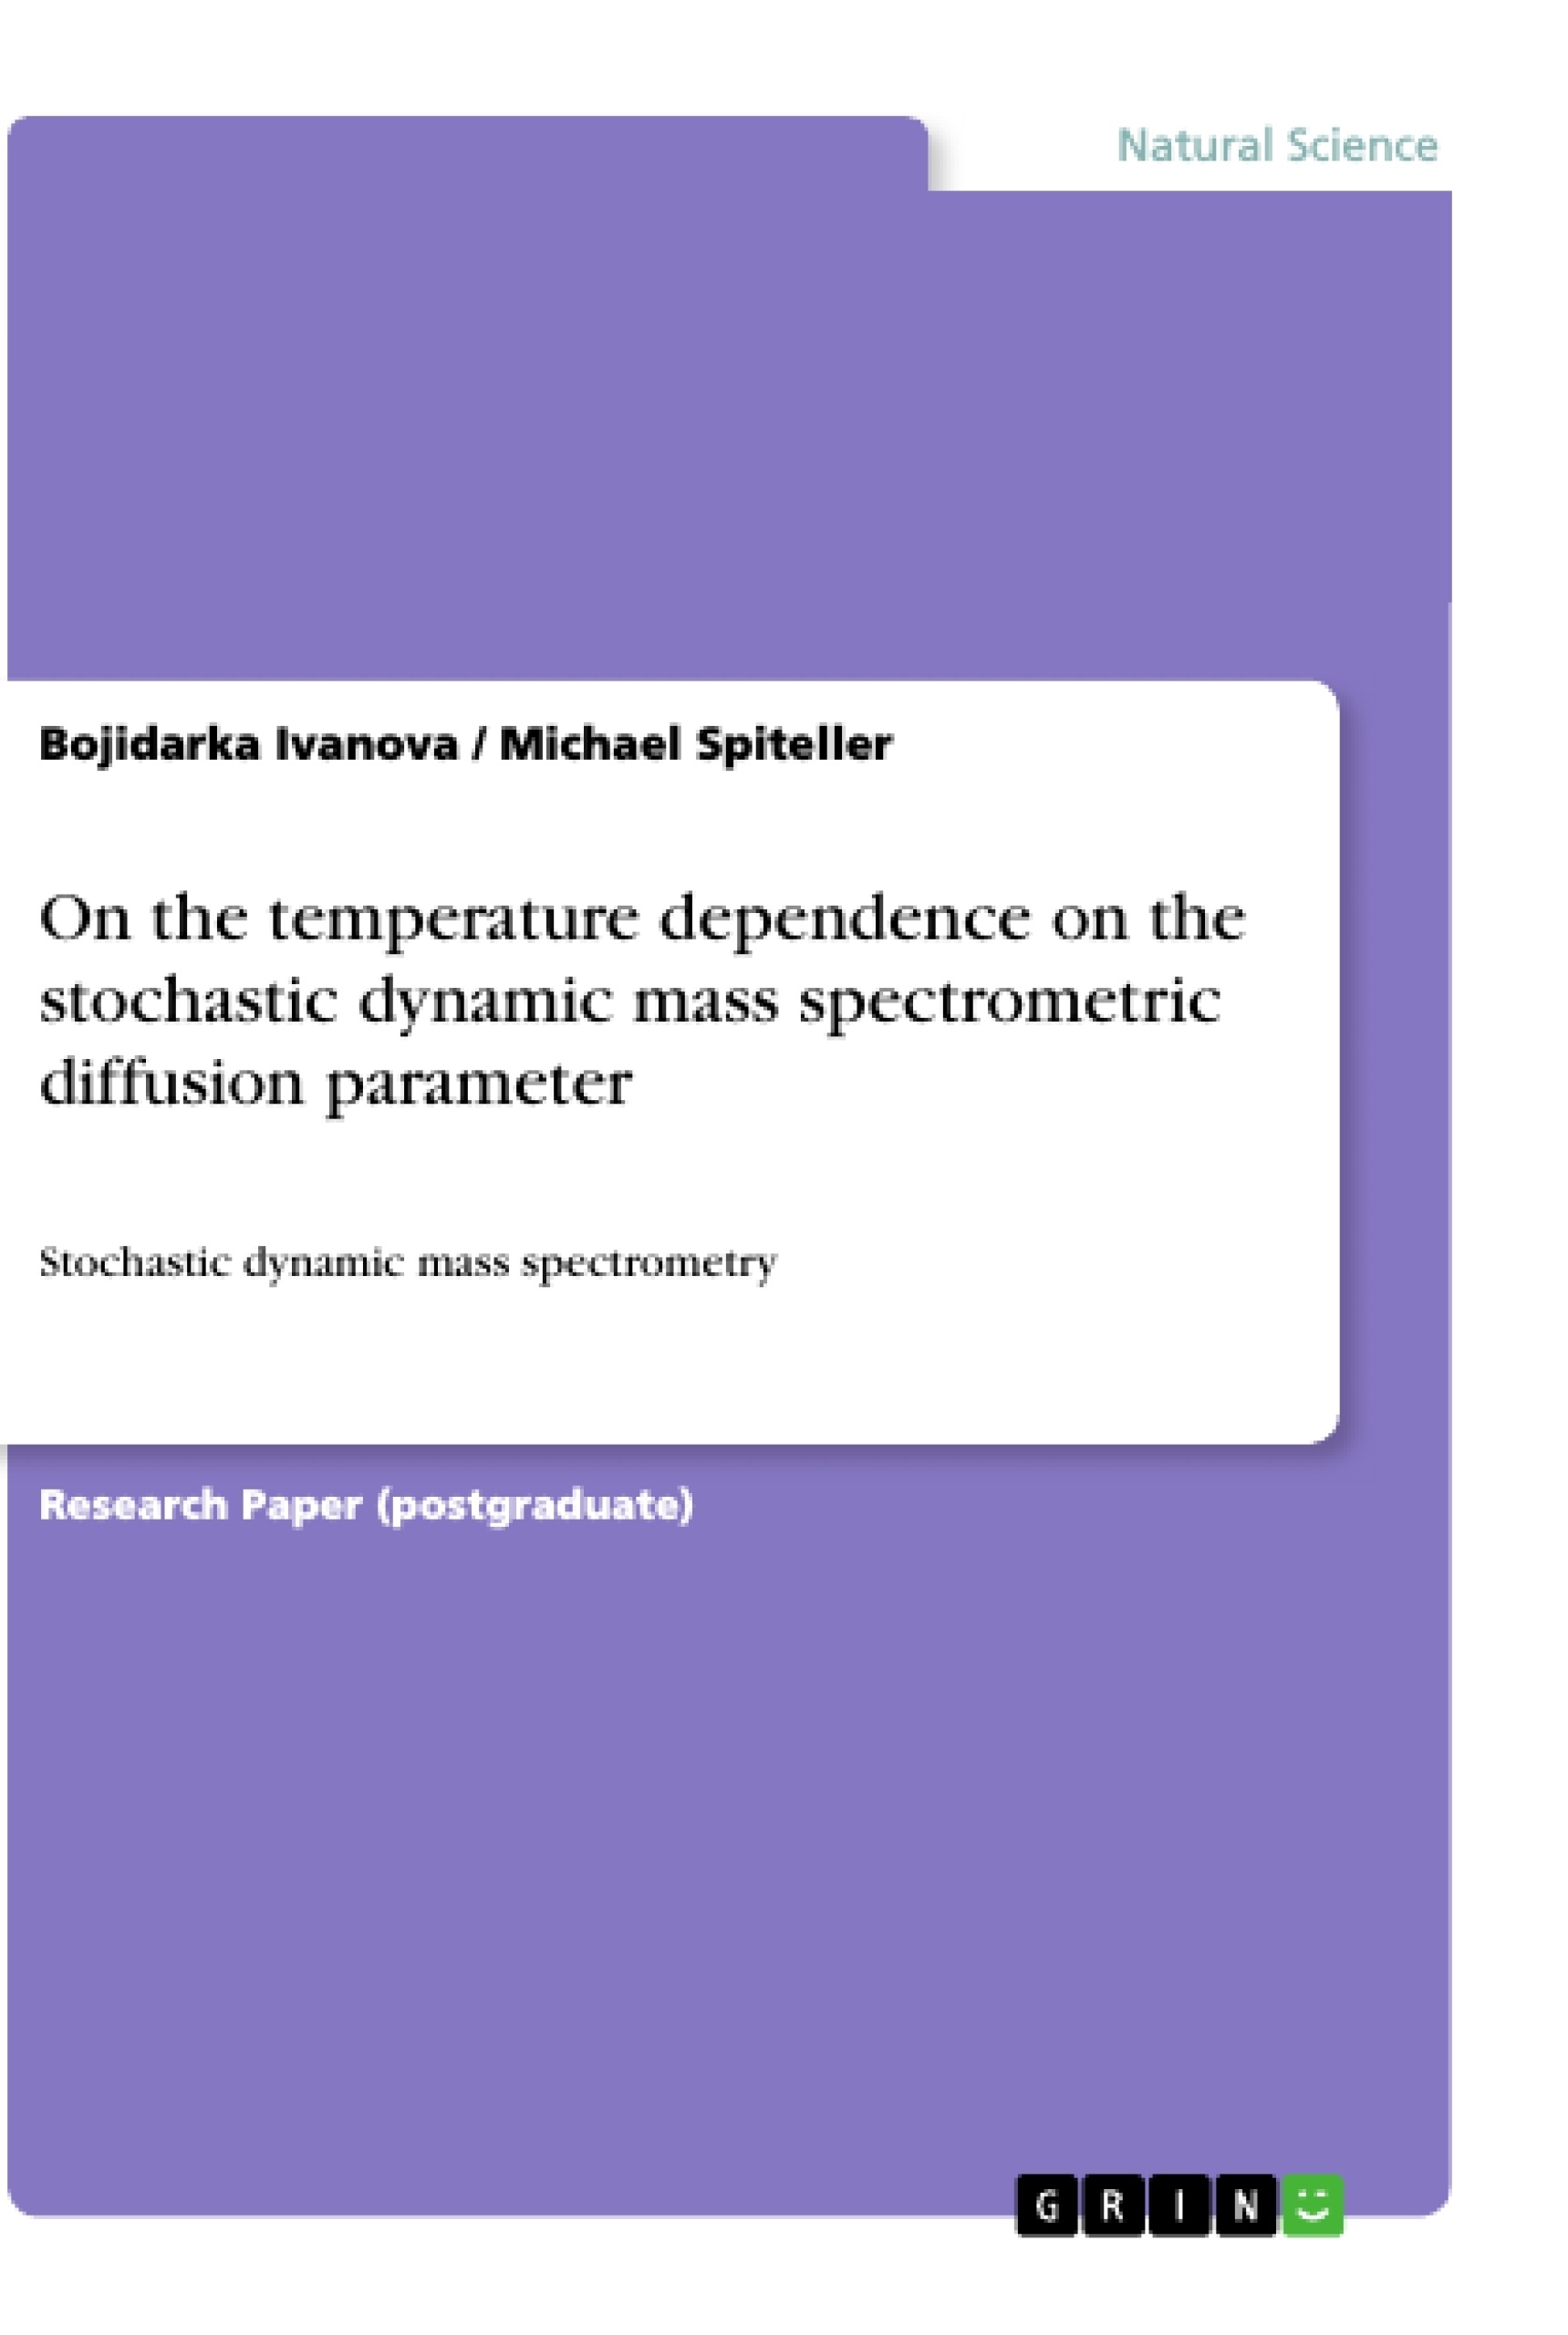 Title: On the temperature dependence on the stochastic dynamic mass spectrometric diffusion parameter